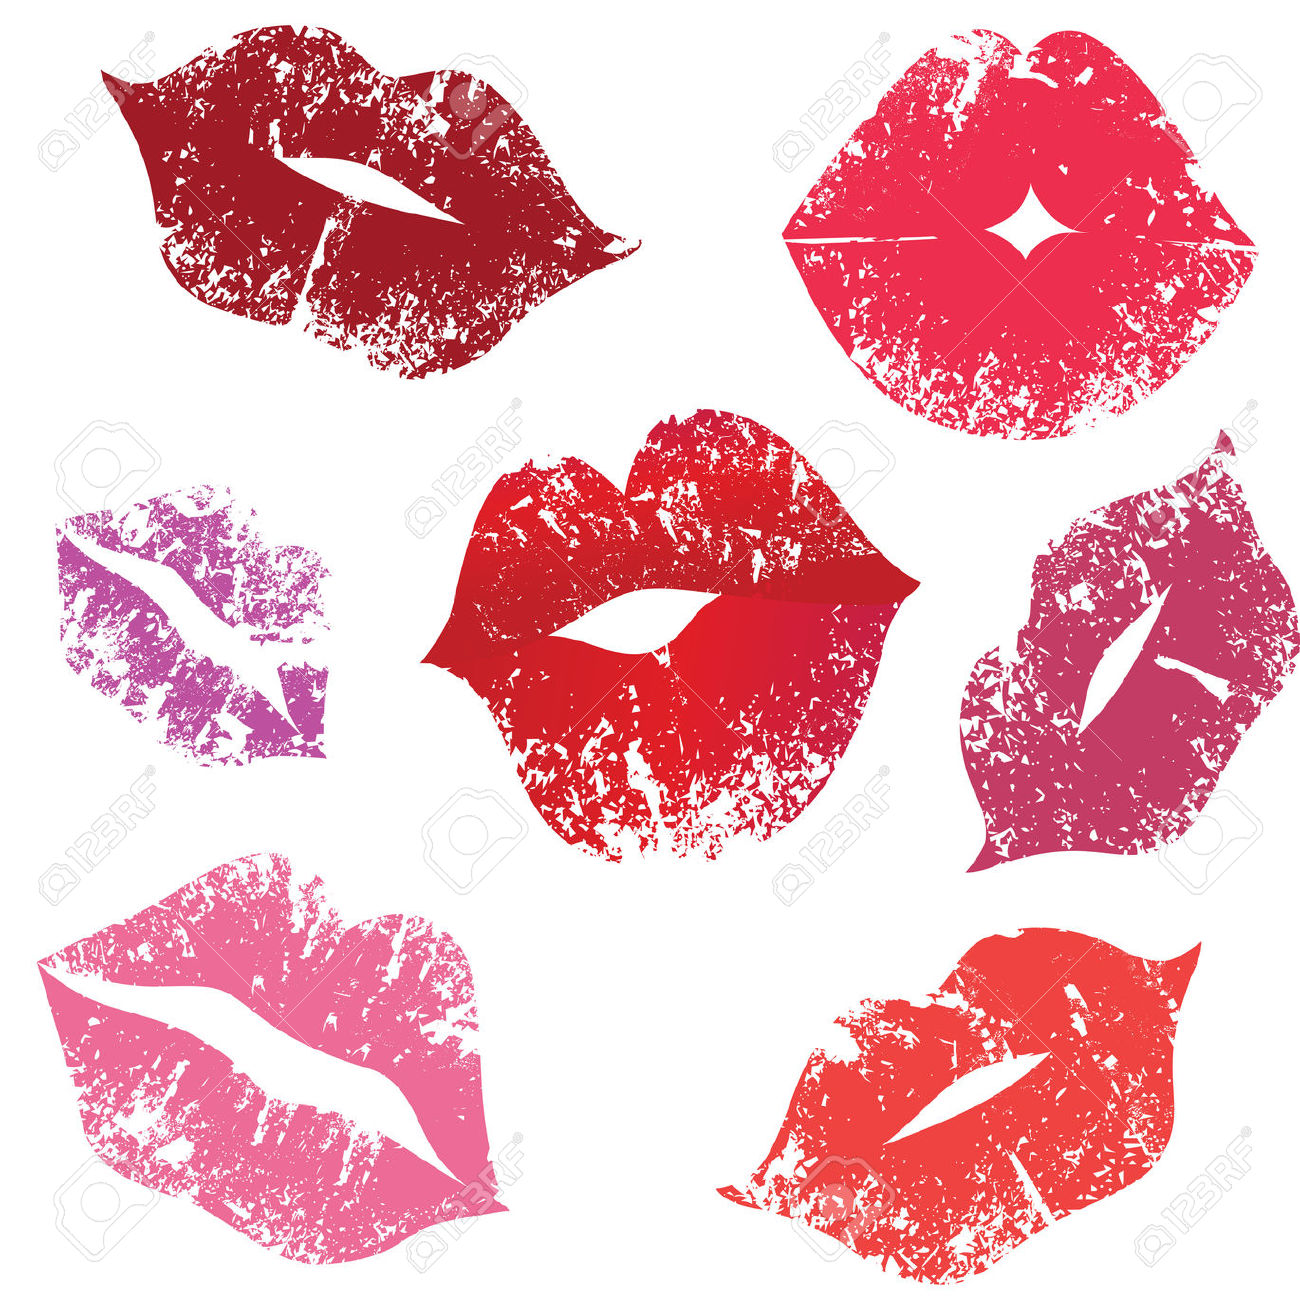 Kiss clipart, Download Kiss clipart for free 2019